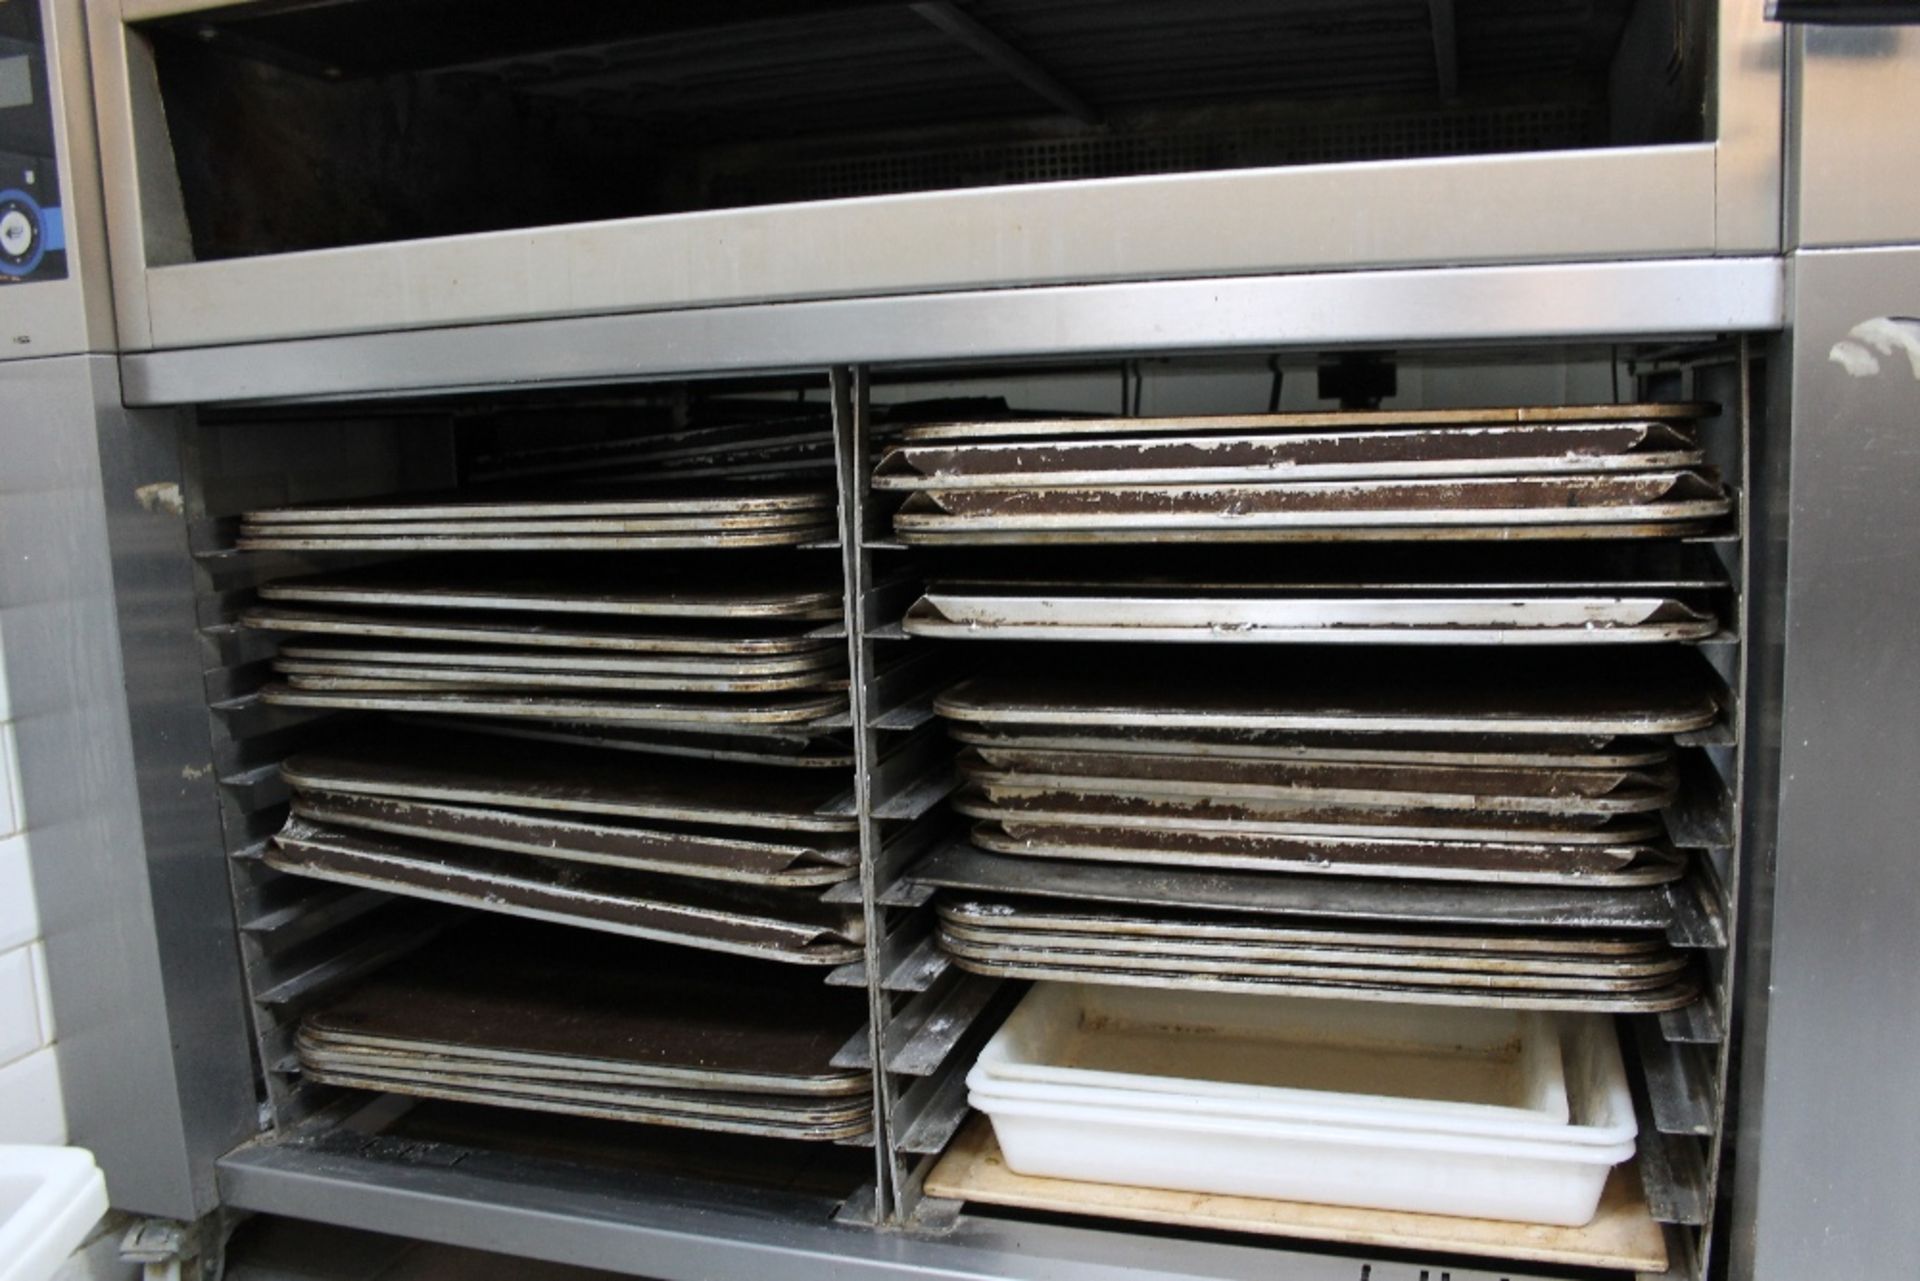 Large Stainless Steel Single Deck Bread / Pastries Oven Under Storage – includes large number of - Image 3 of 3